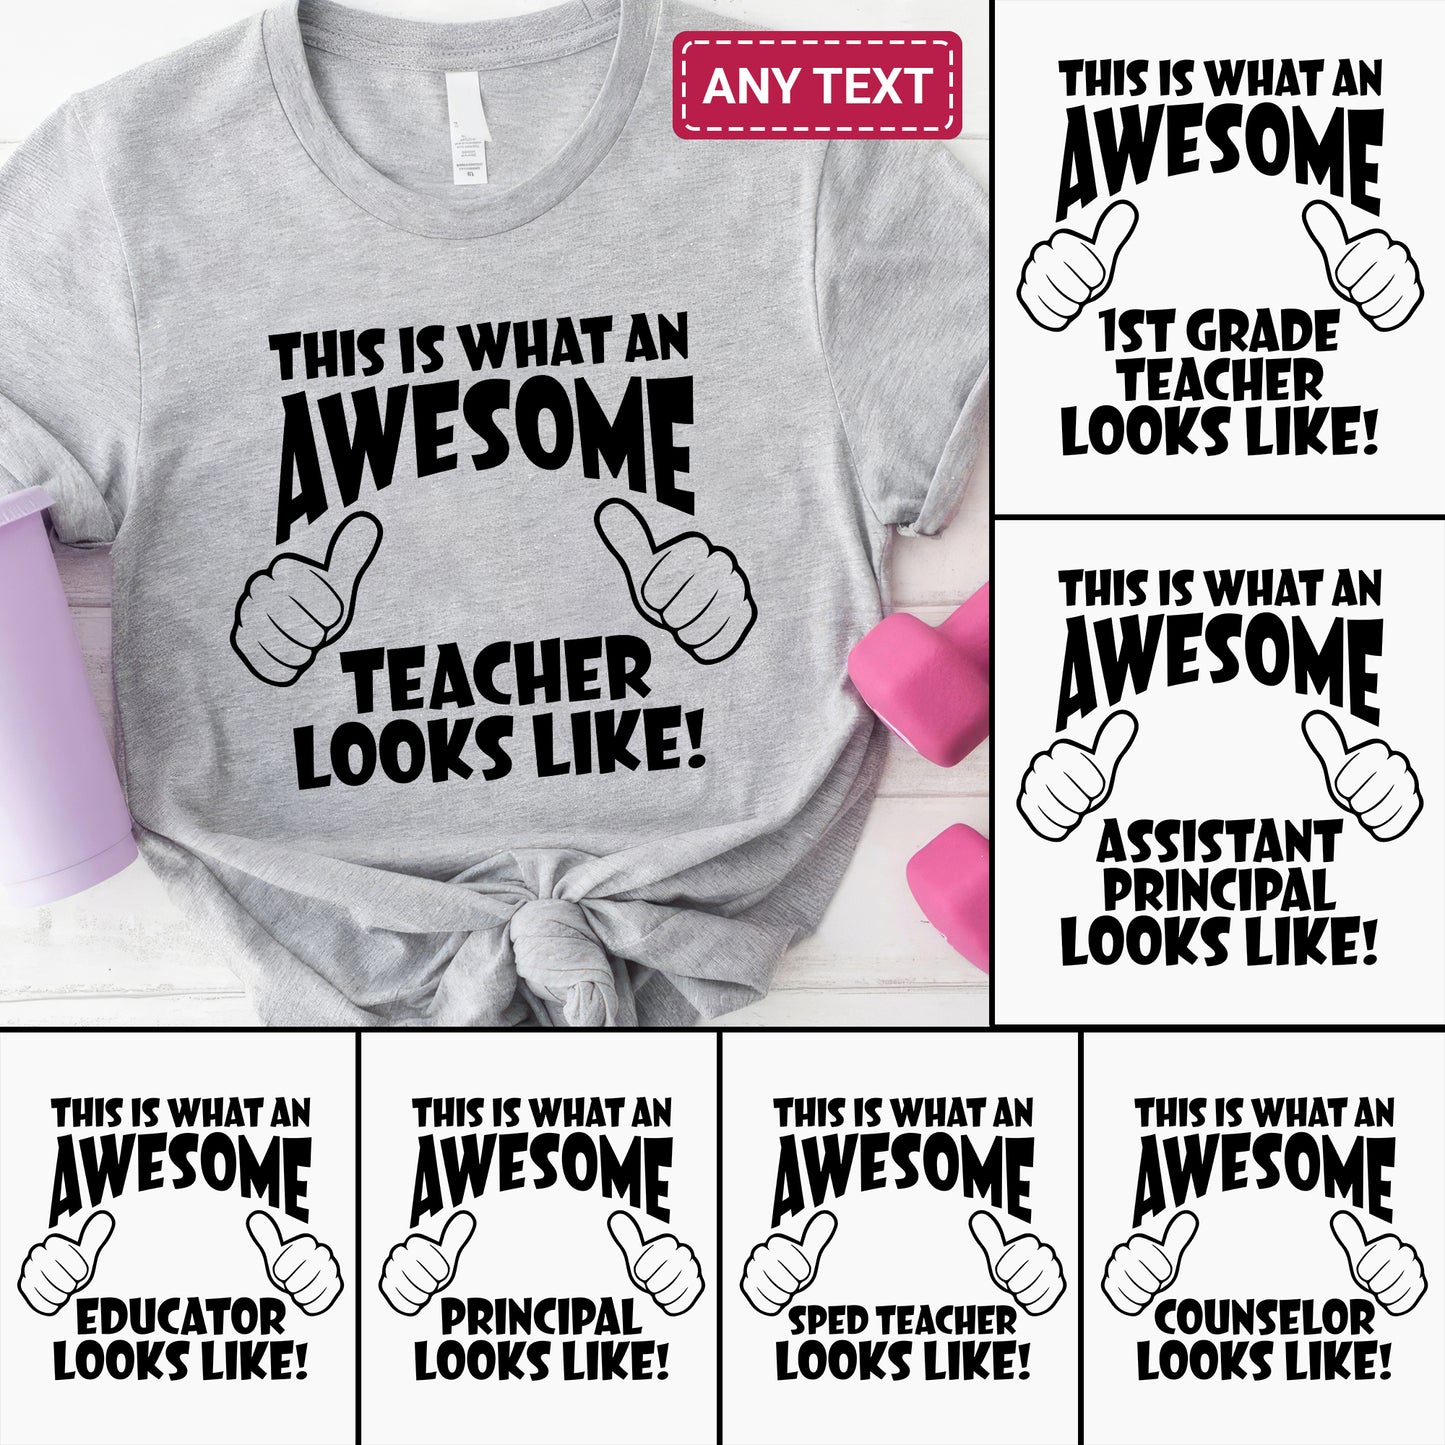 This Is An Awesome Teacher Looks Like Personalized Tee | Back To School Customized T-shirts | Funny Quote Teacher T-shirt